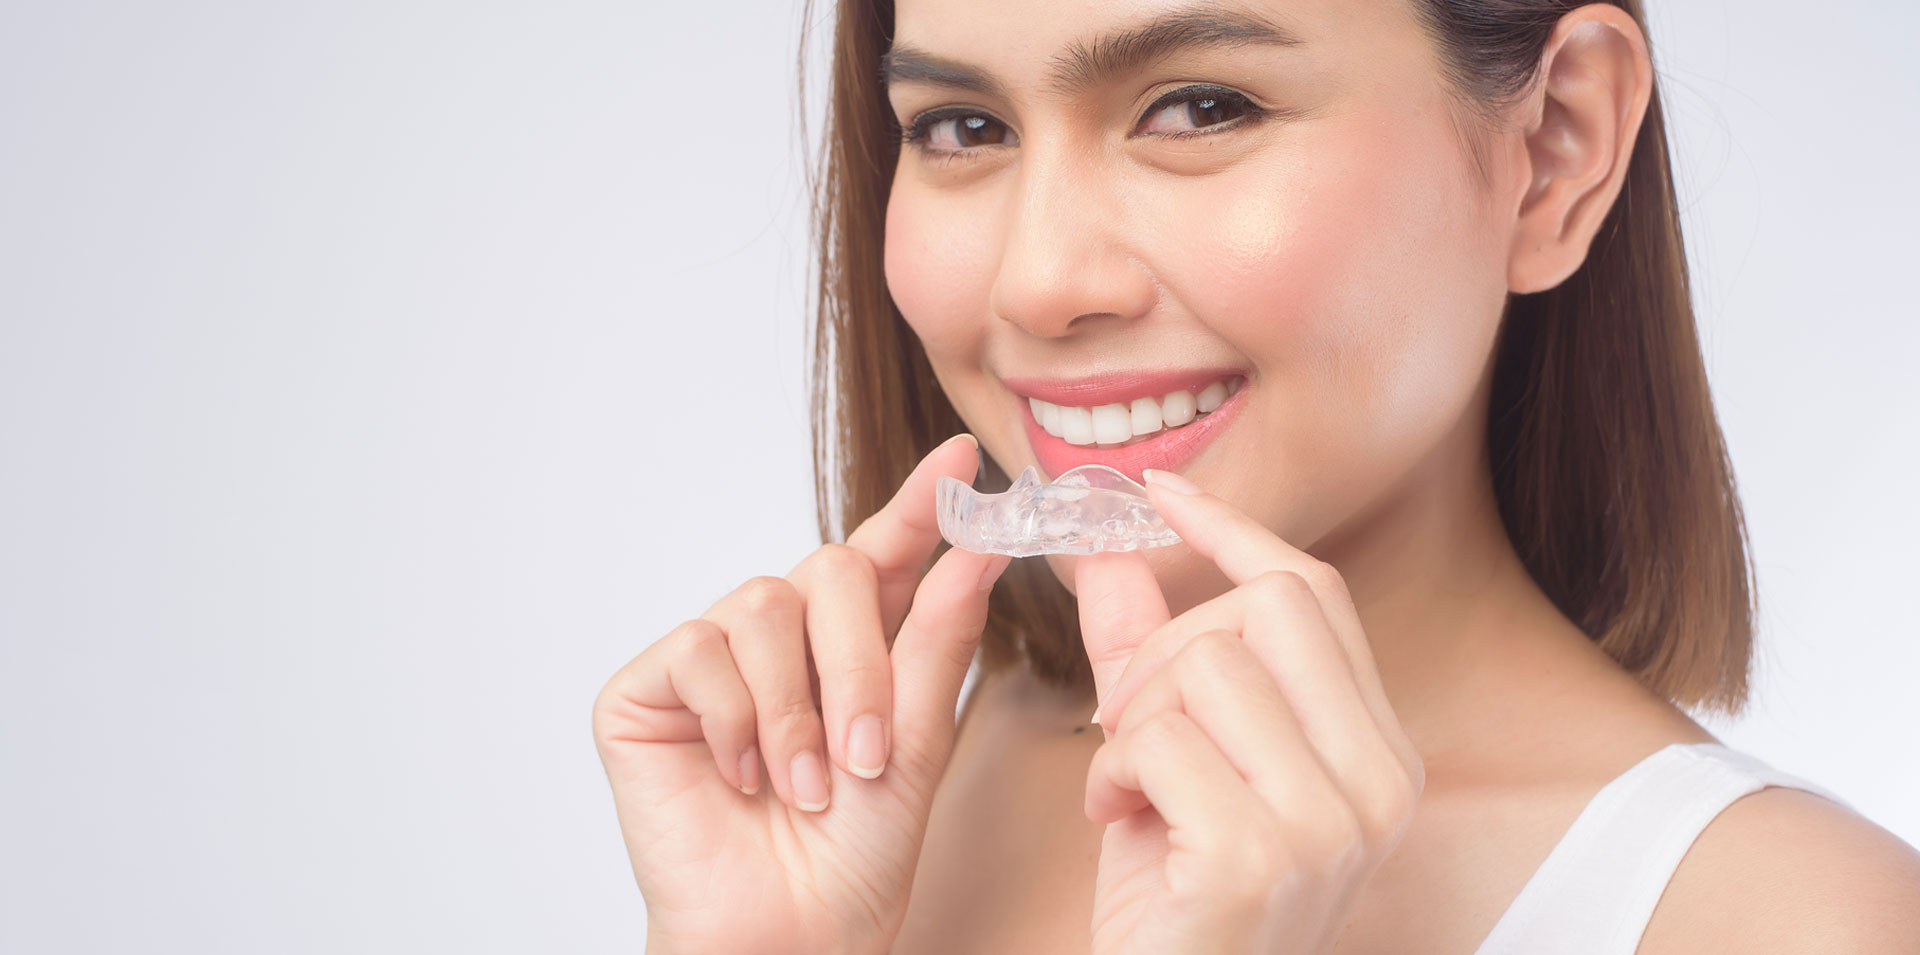 A young smiling woman holding invisalign braces